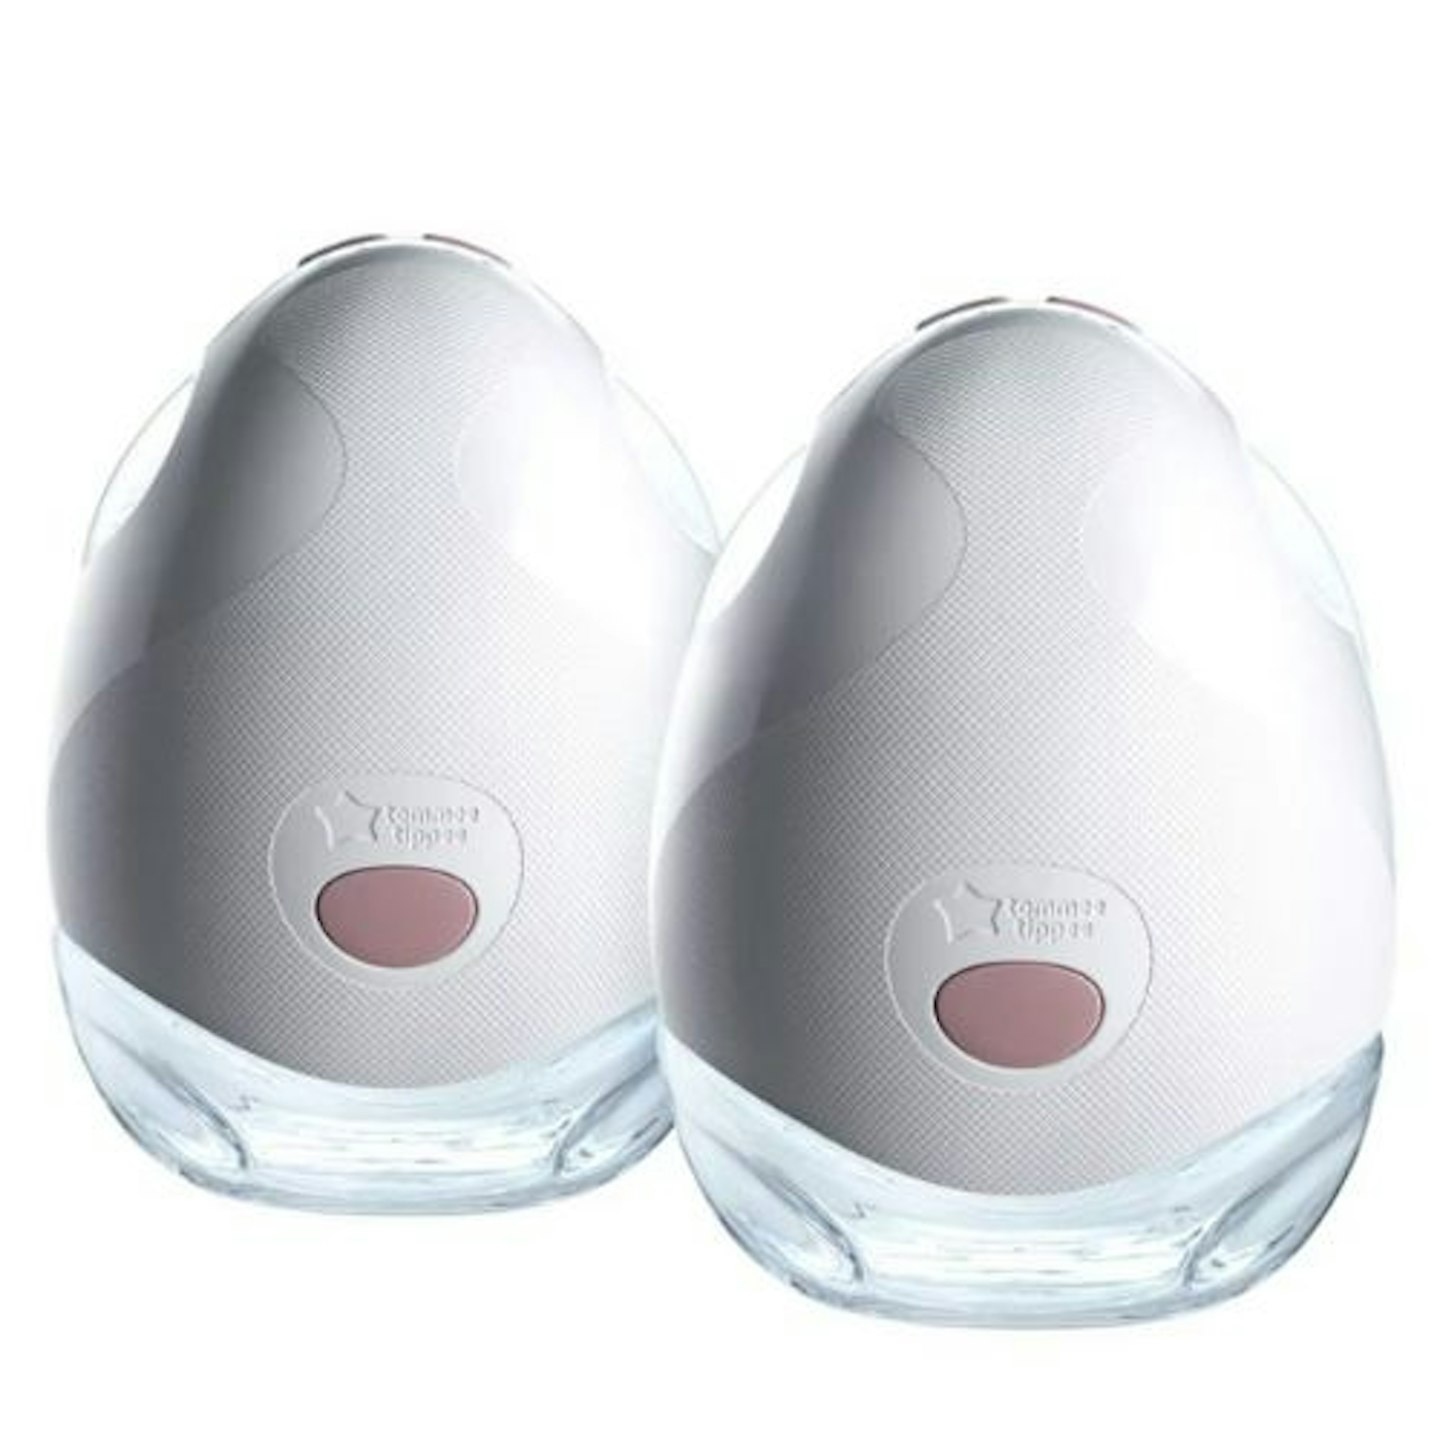 Best Breast Pump: Tommee Tippee Made for Me Double Electric Wearable Breast Pump